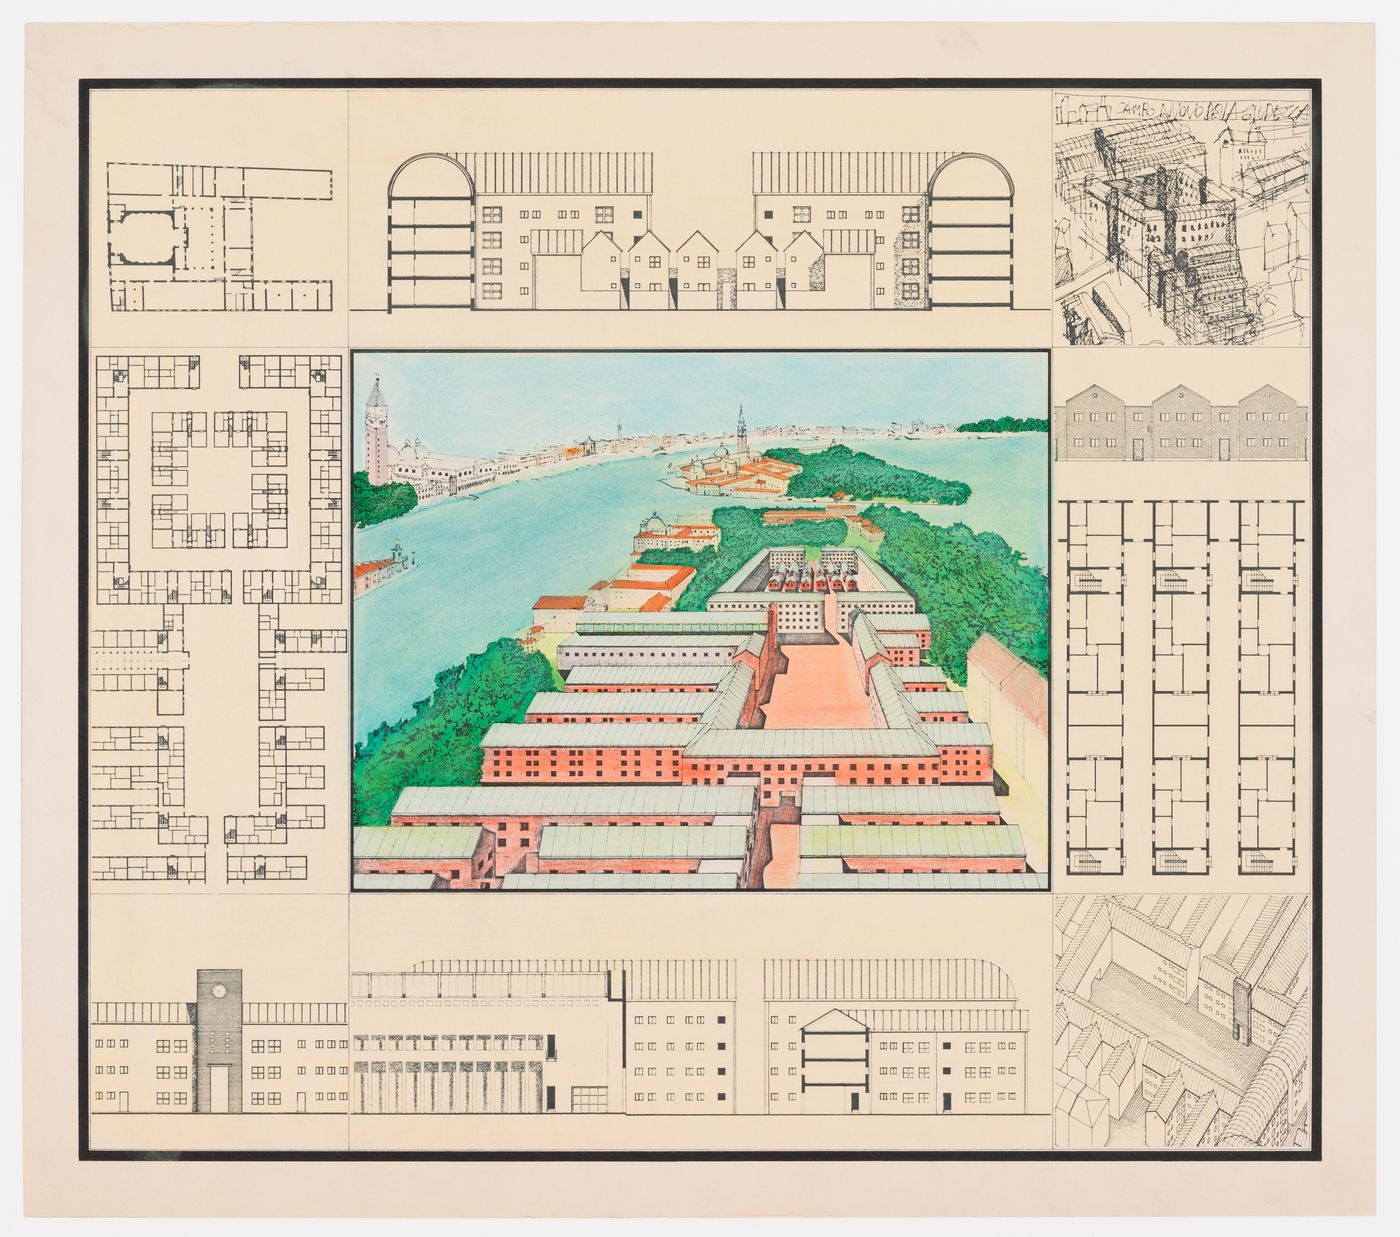 Project for redevelopment of the Campo di Marte area of La Giudecca, Venice, Italy: bird's-eye perspective surrounded by plans, elevations and perspectives